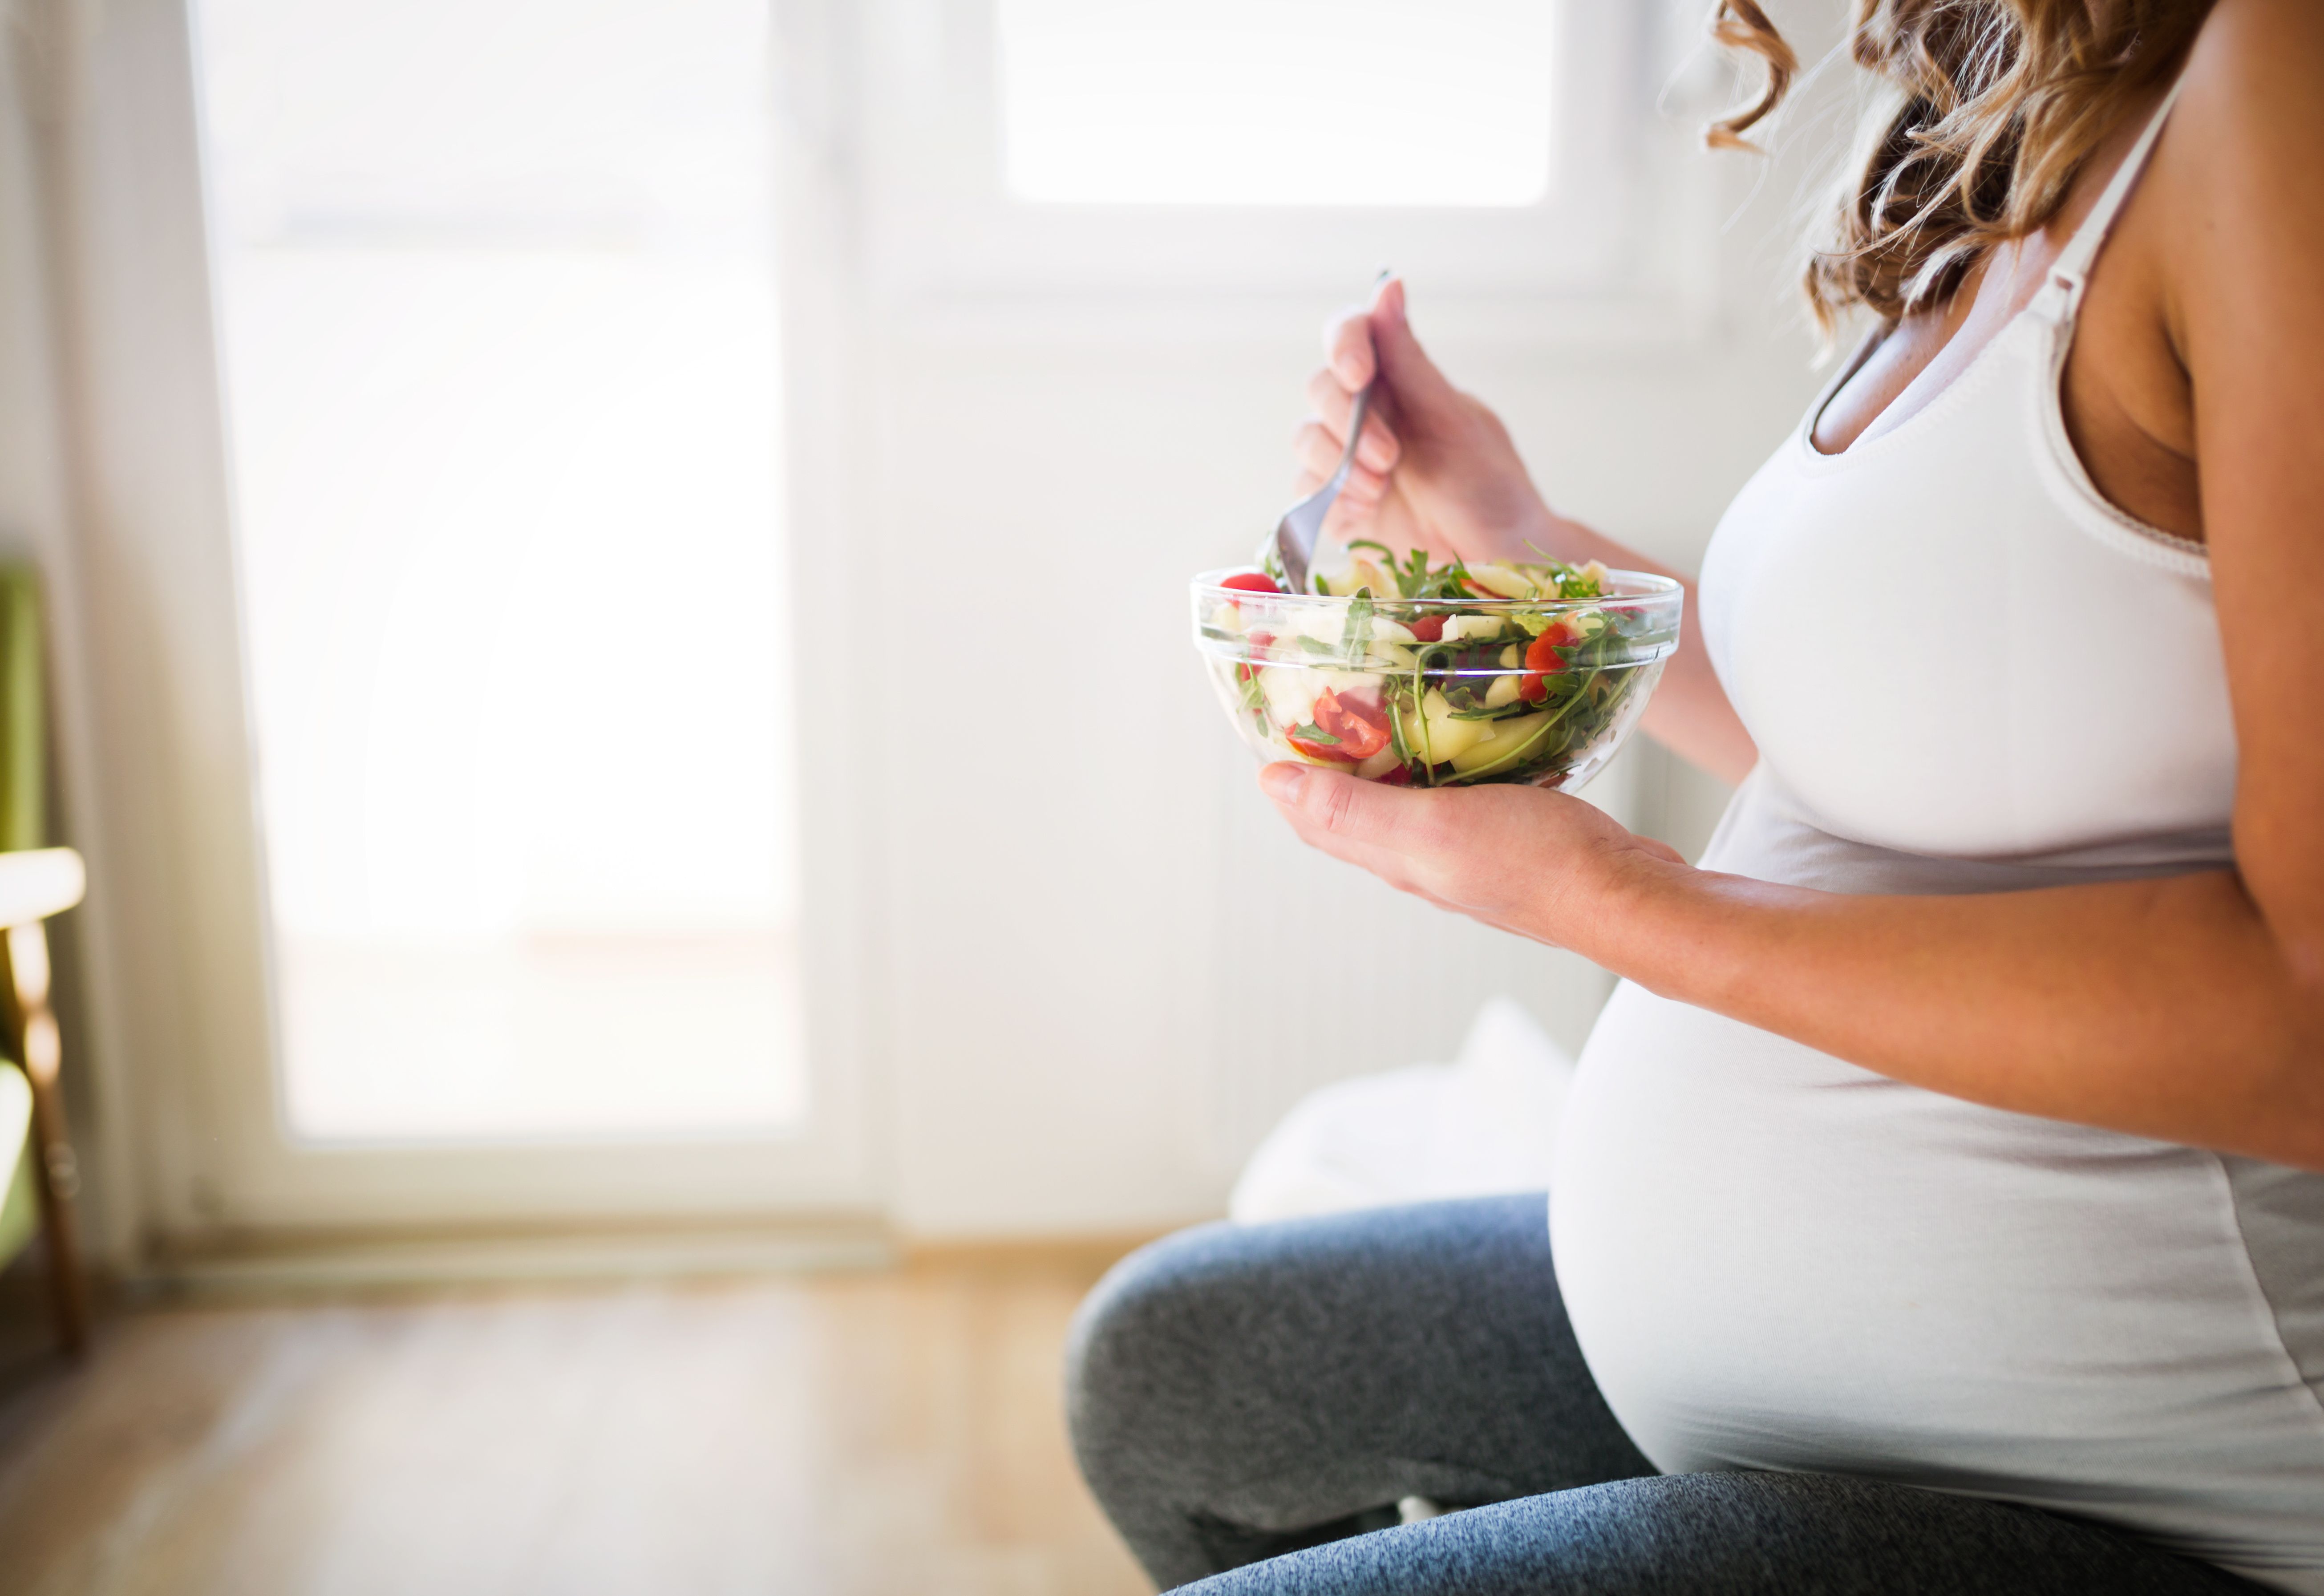 Are women’s diets before and during pregnancy healthy?